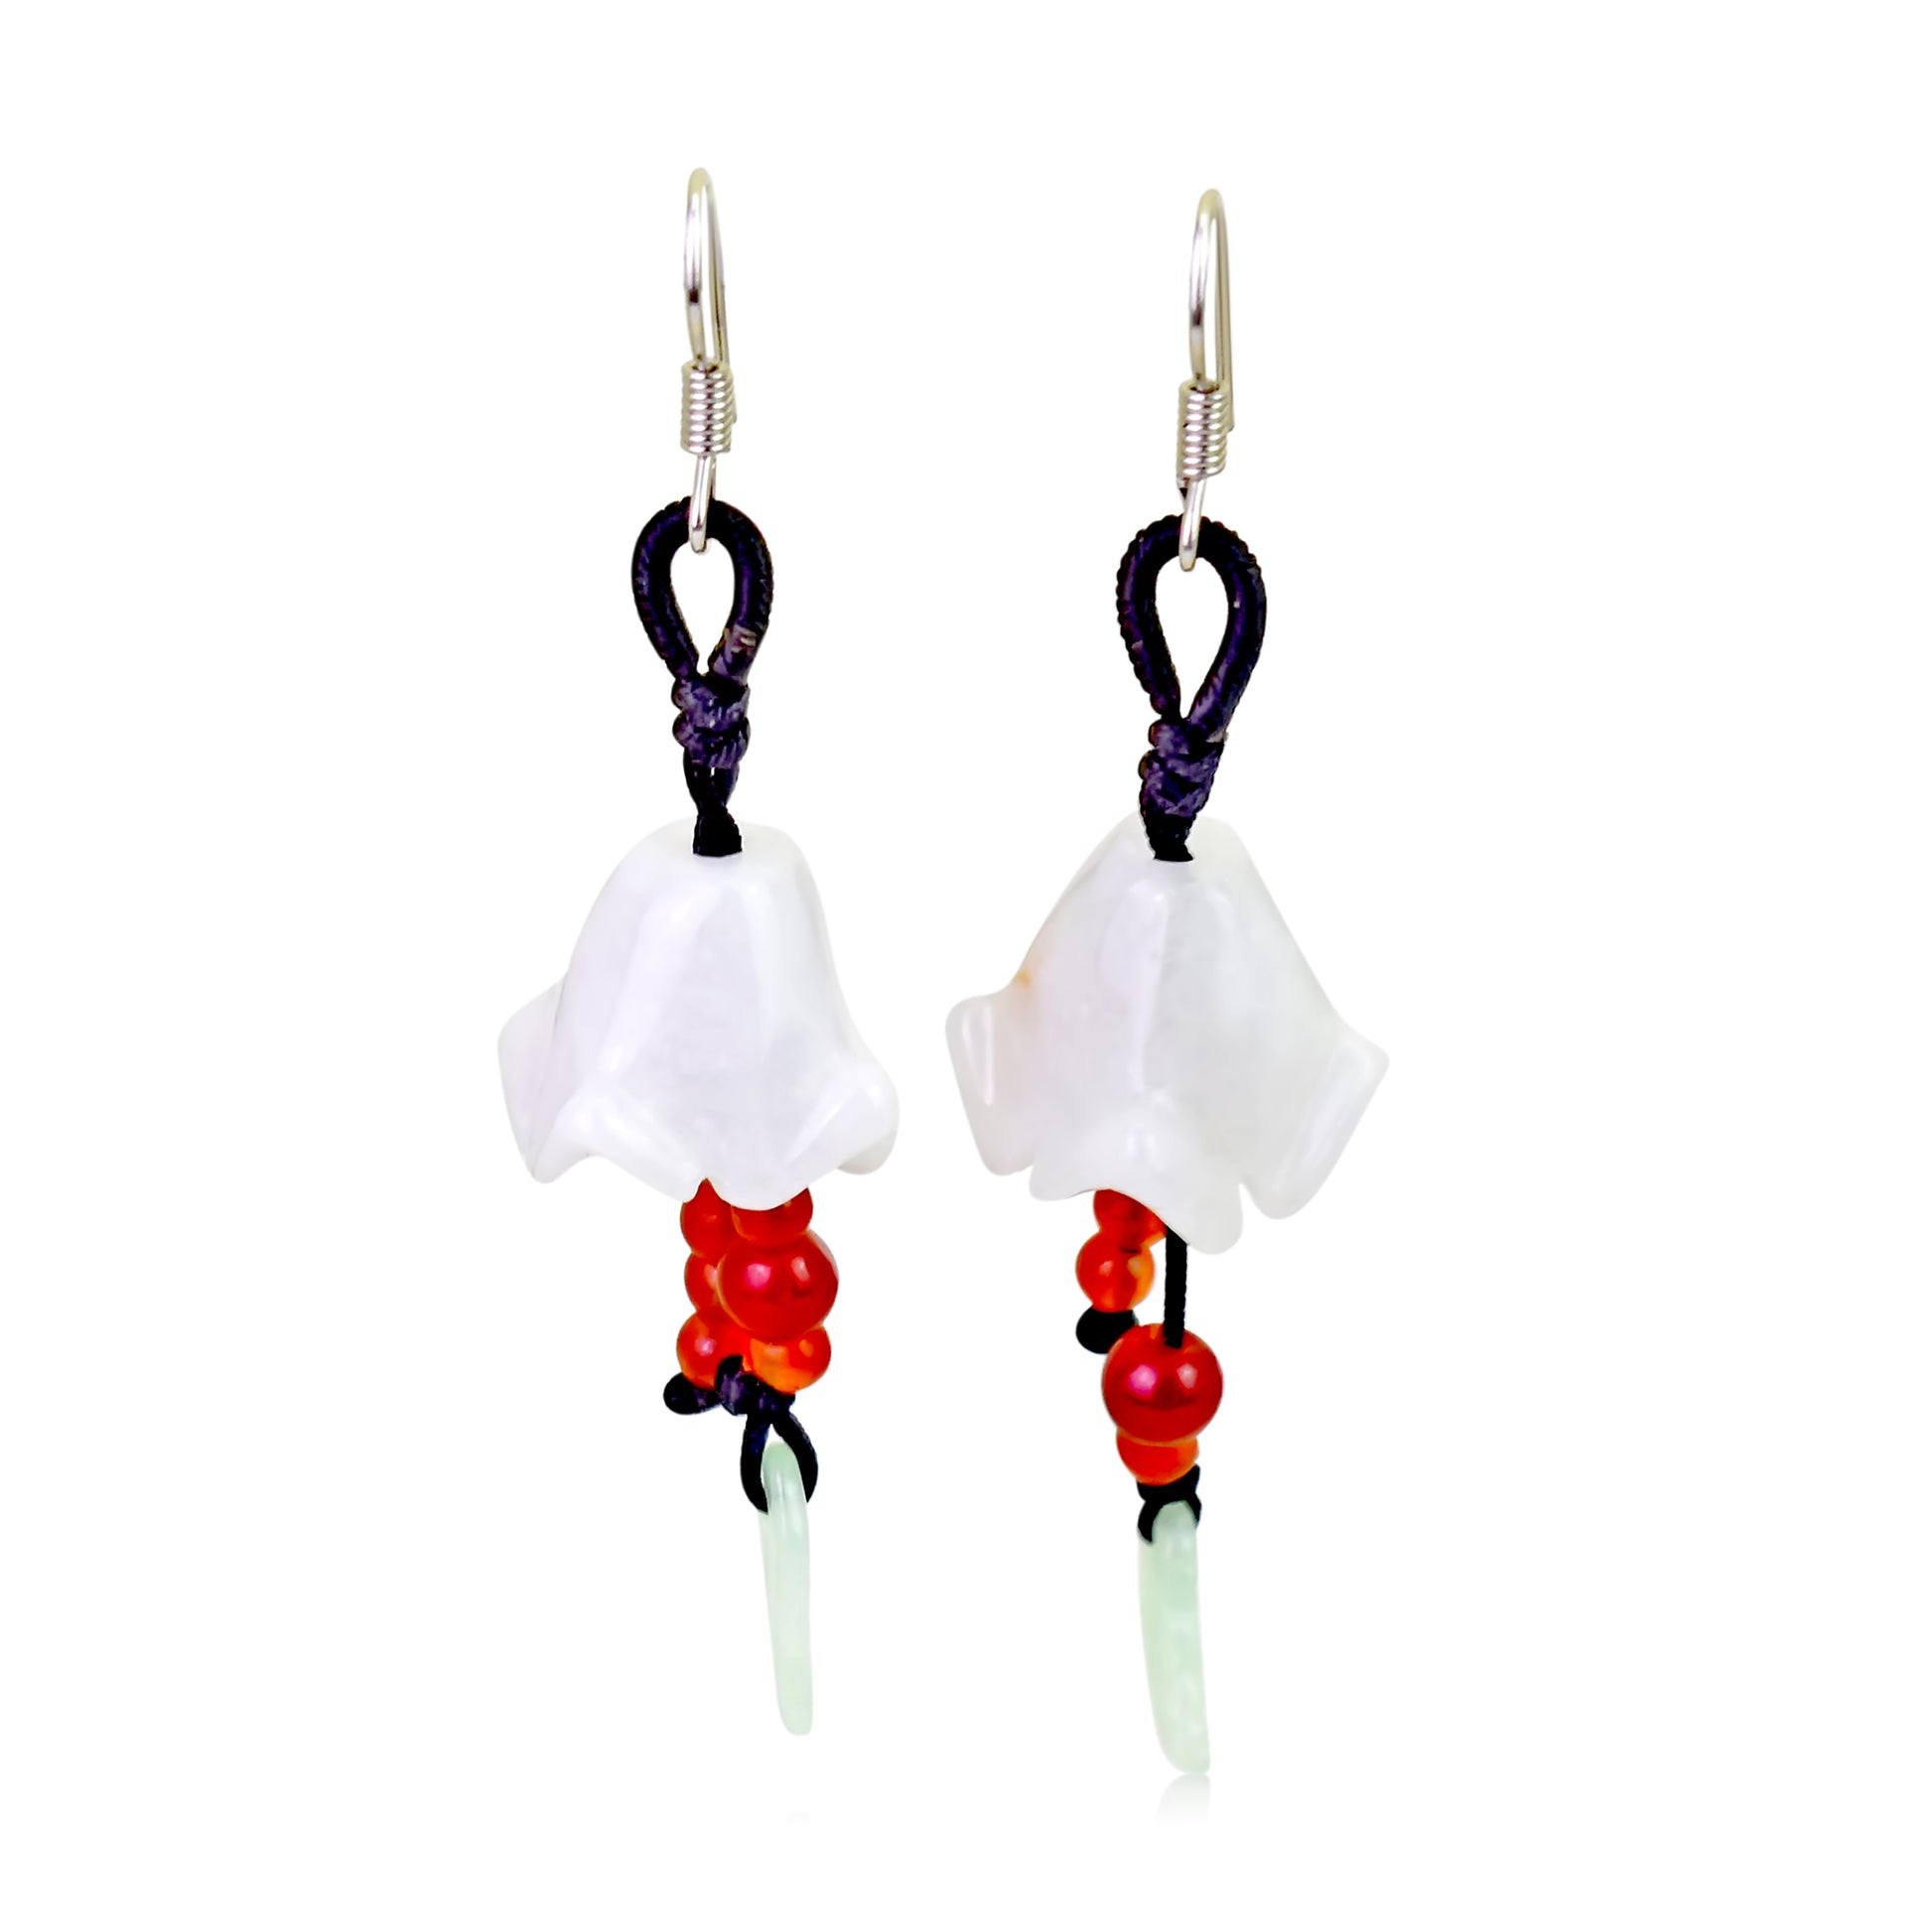 Refresh Your Look with Unique Jade Bellflower Earrings made with Black Cord